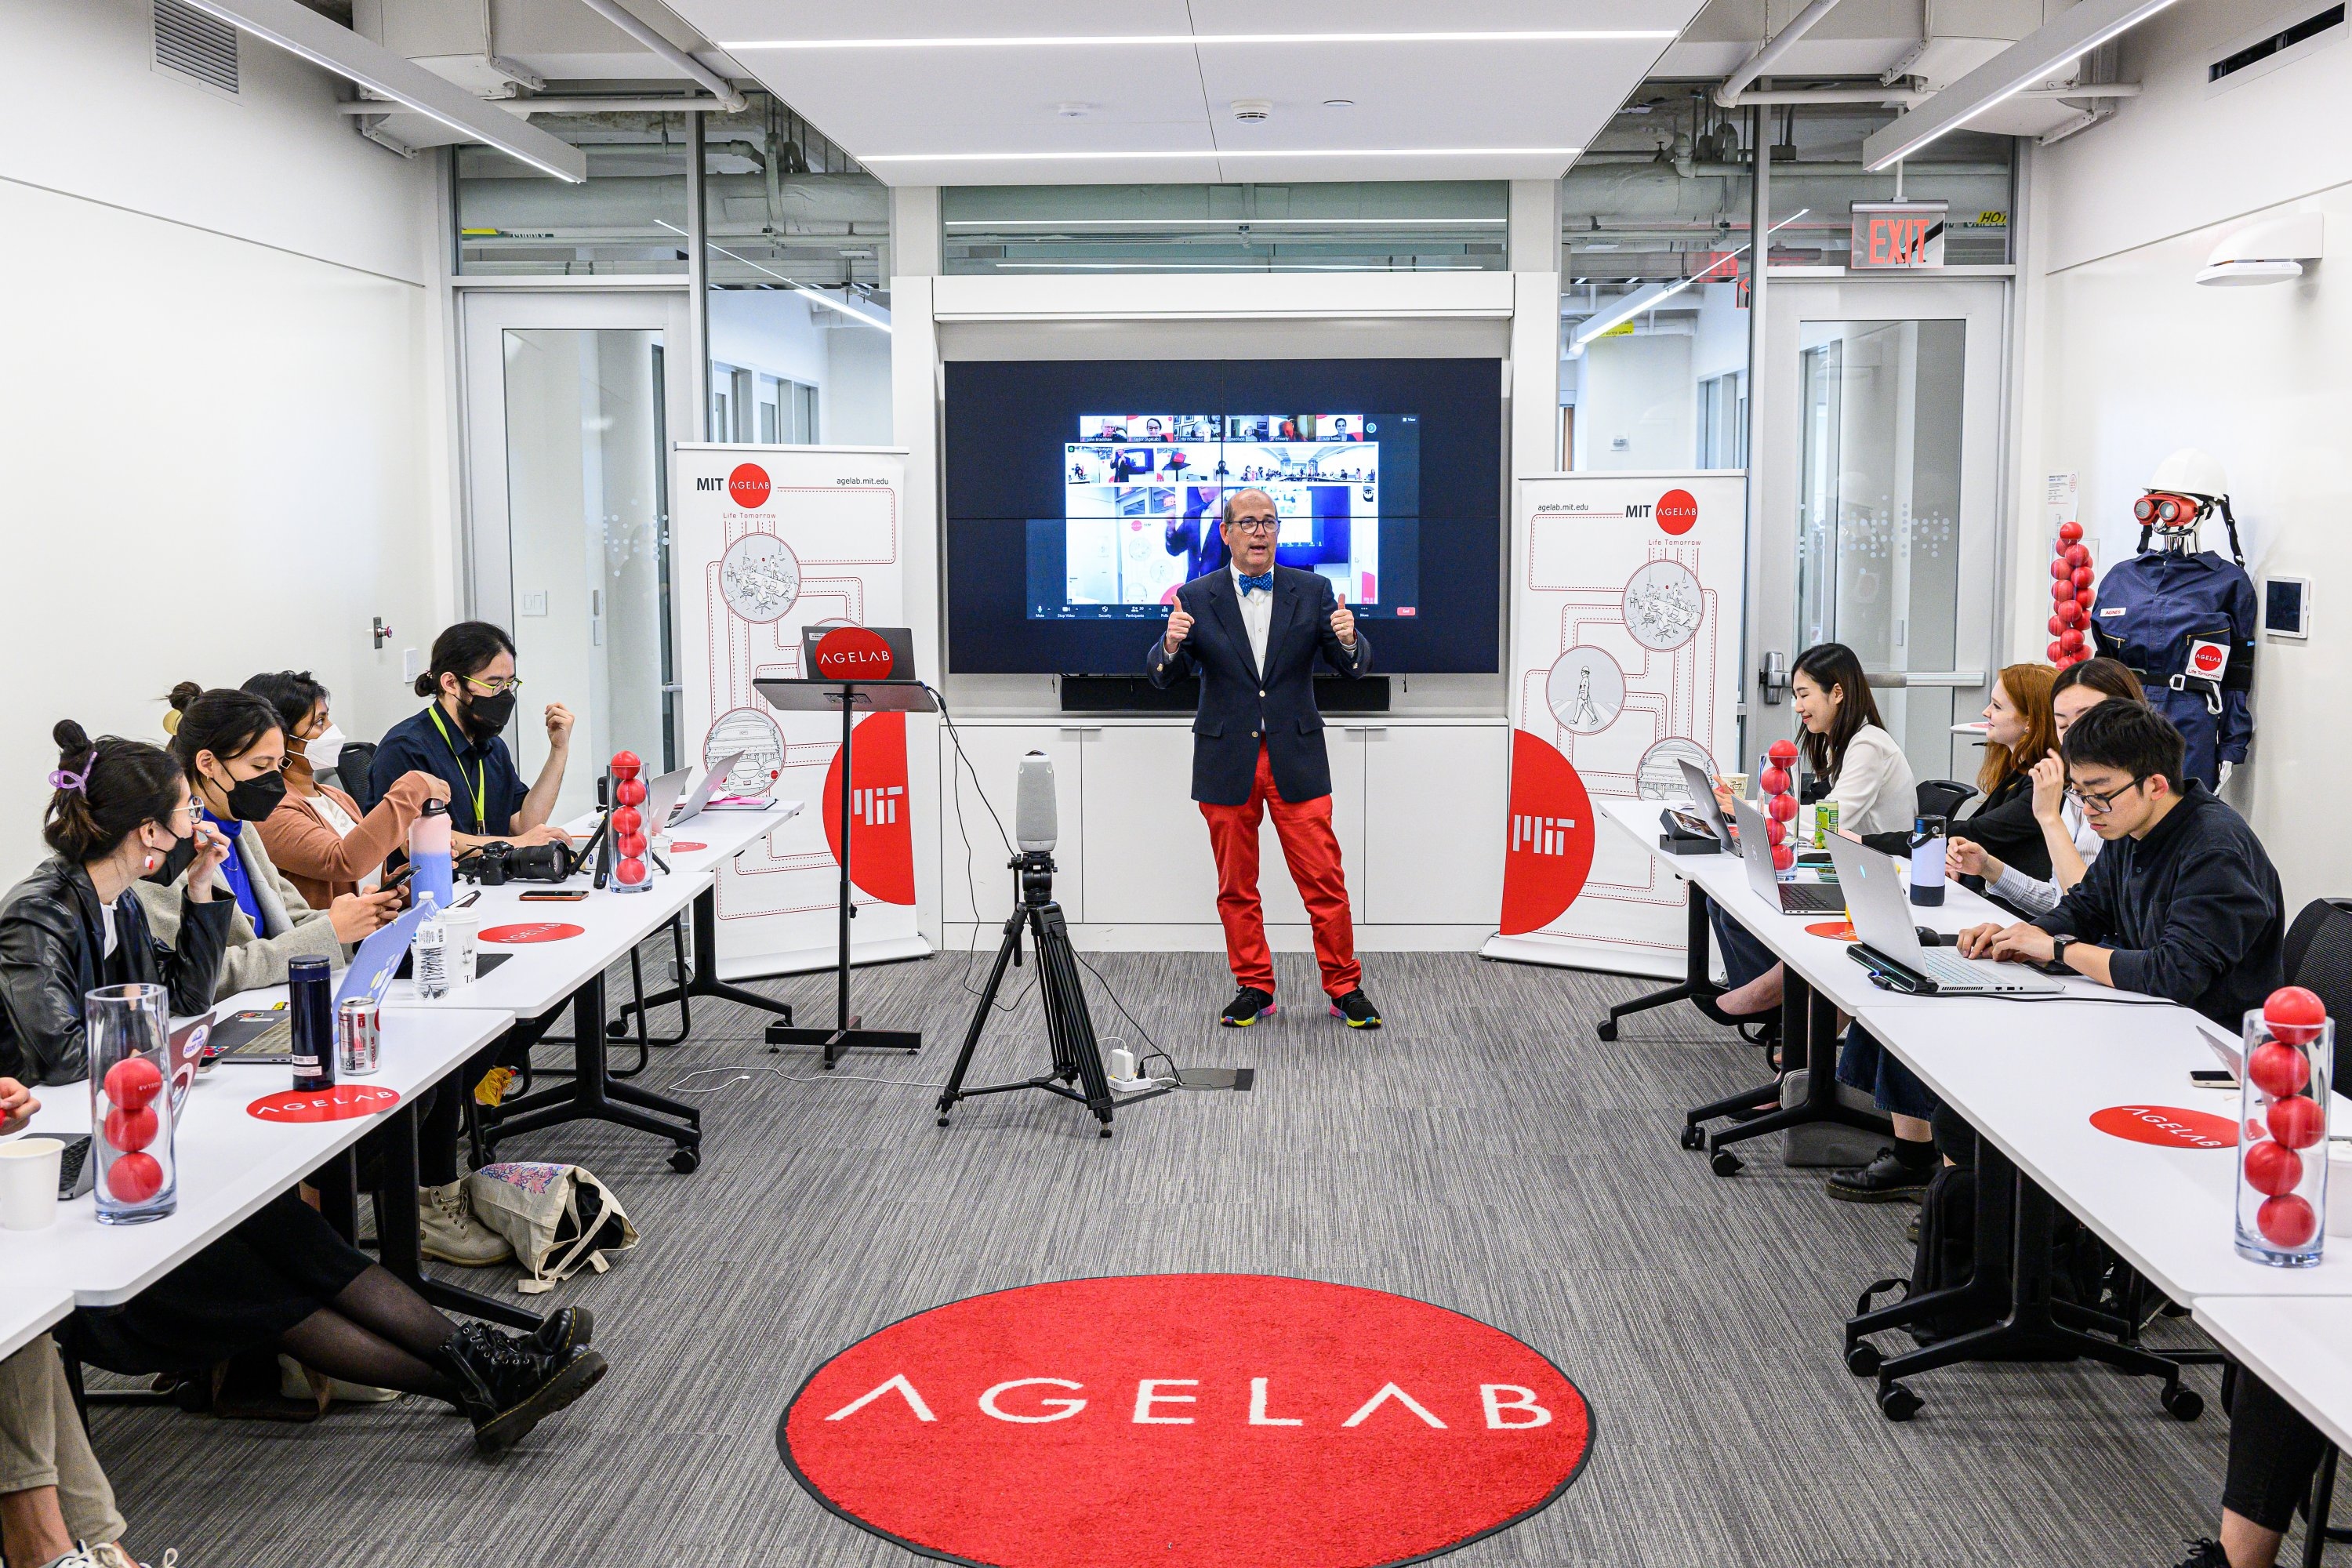 Joseph Coughlin, director of the MIT AgeLab, delivers a lecture at the AgeLab’s headquarters in MIT’s Center for Transportation and Logistics.